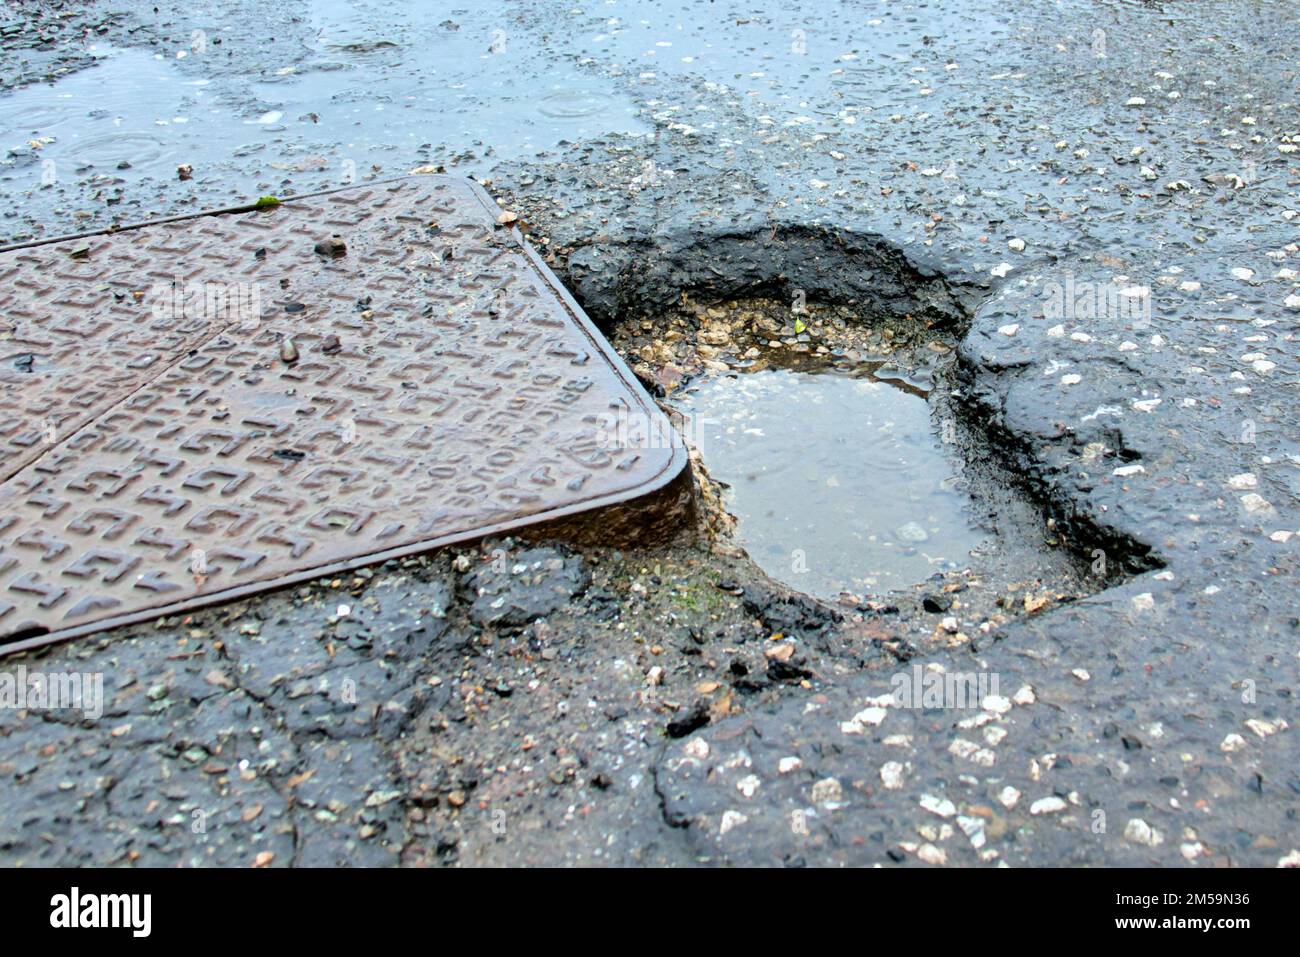 Dangerous pothole in middle of road beside drain cover Stock Photo